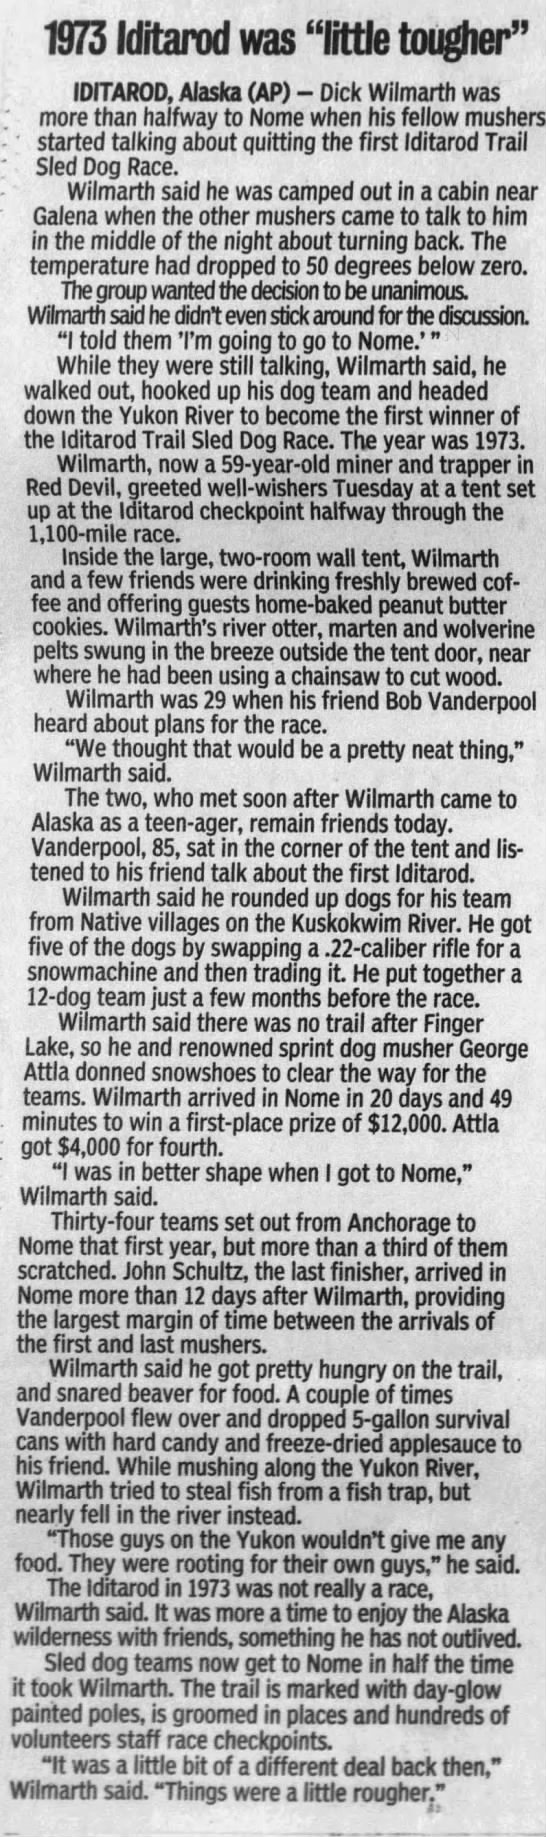 2001 interview with winner of first Iditarod - 